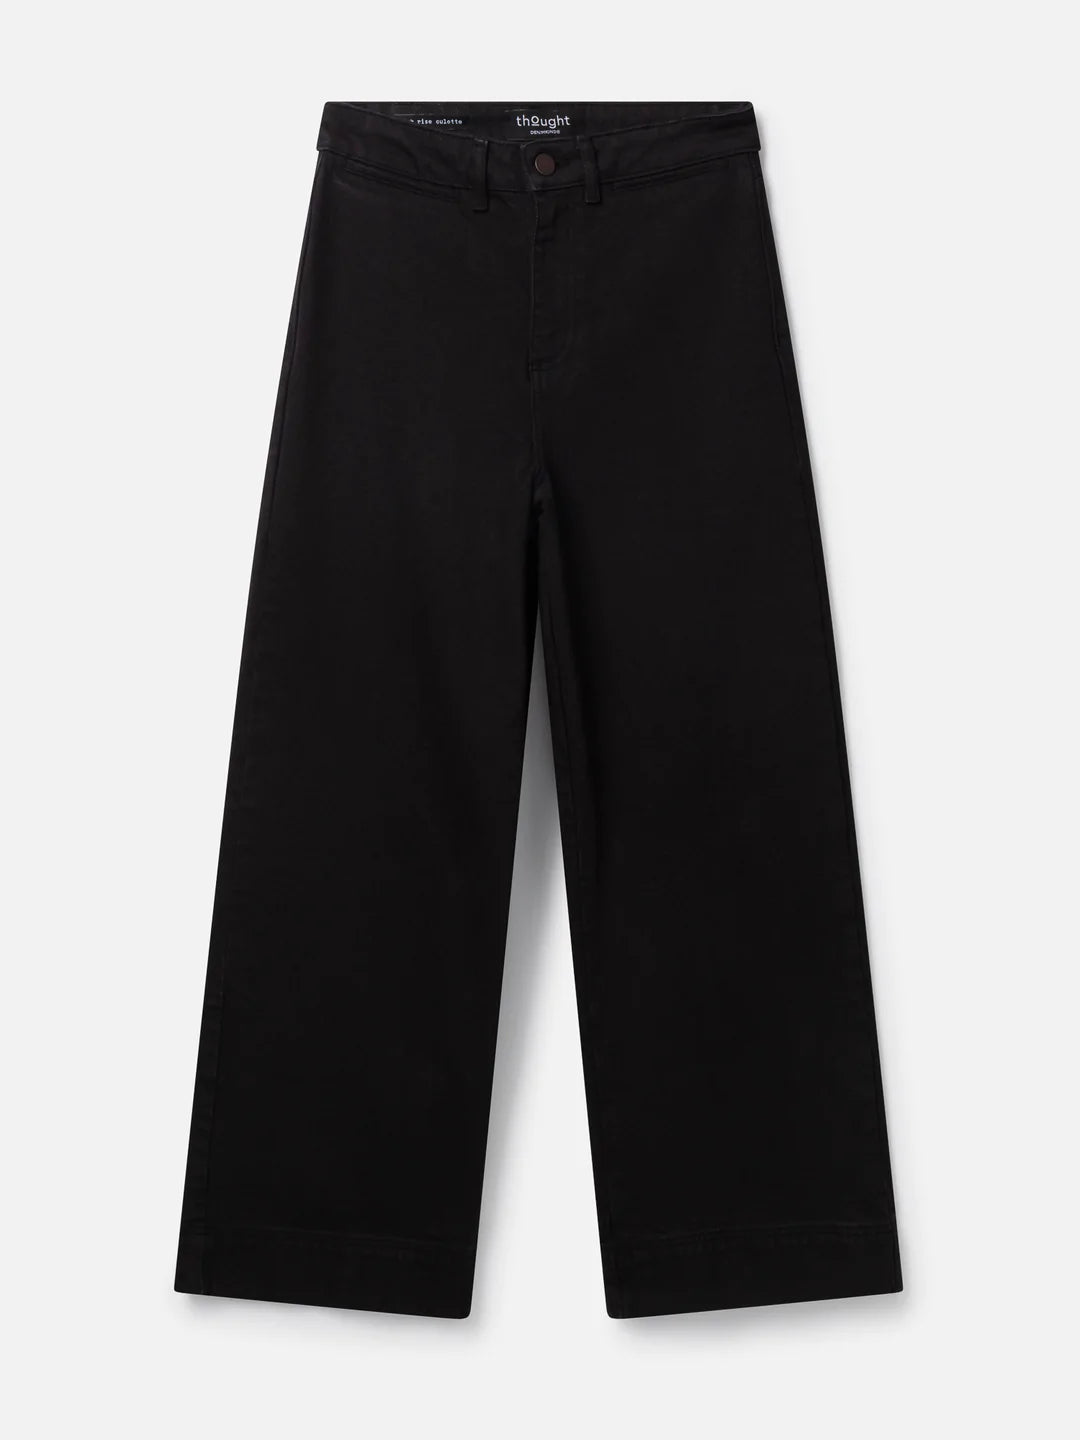 Thought Organic Cotton Culottes Black - Size: 18